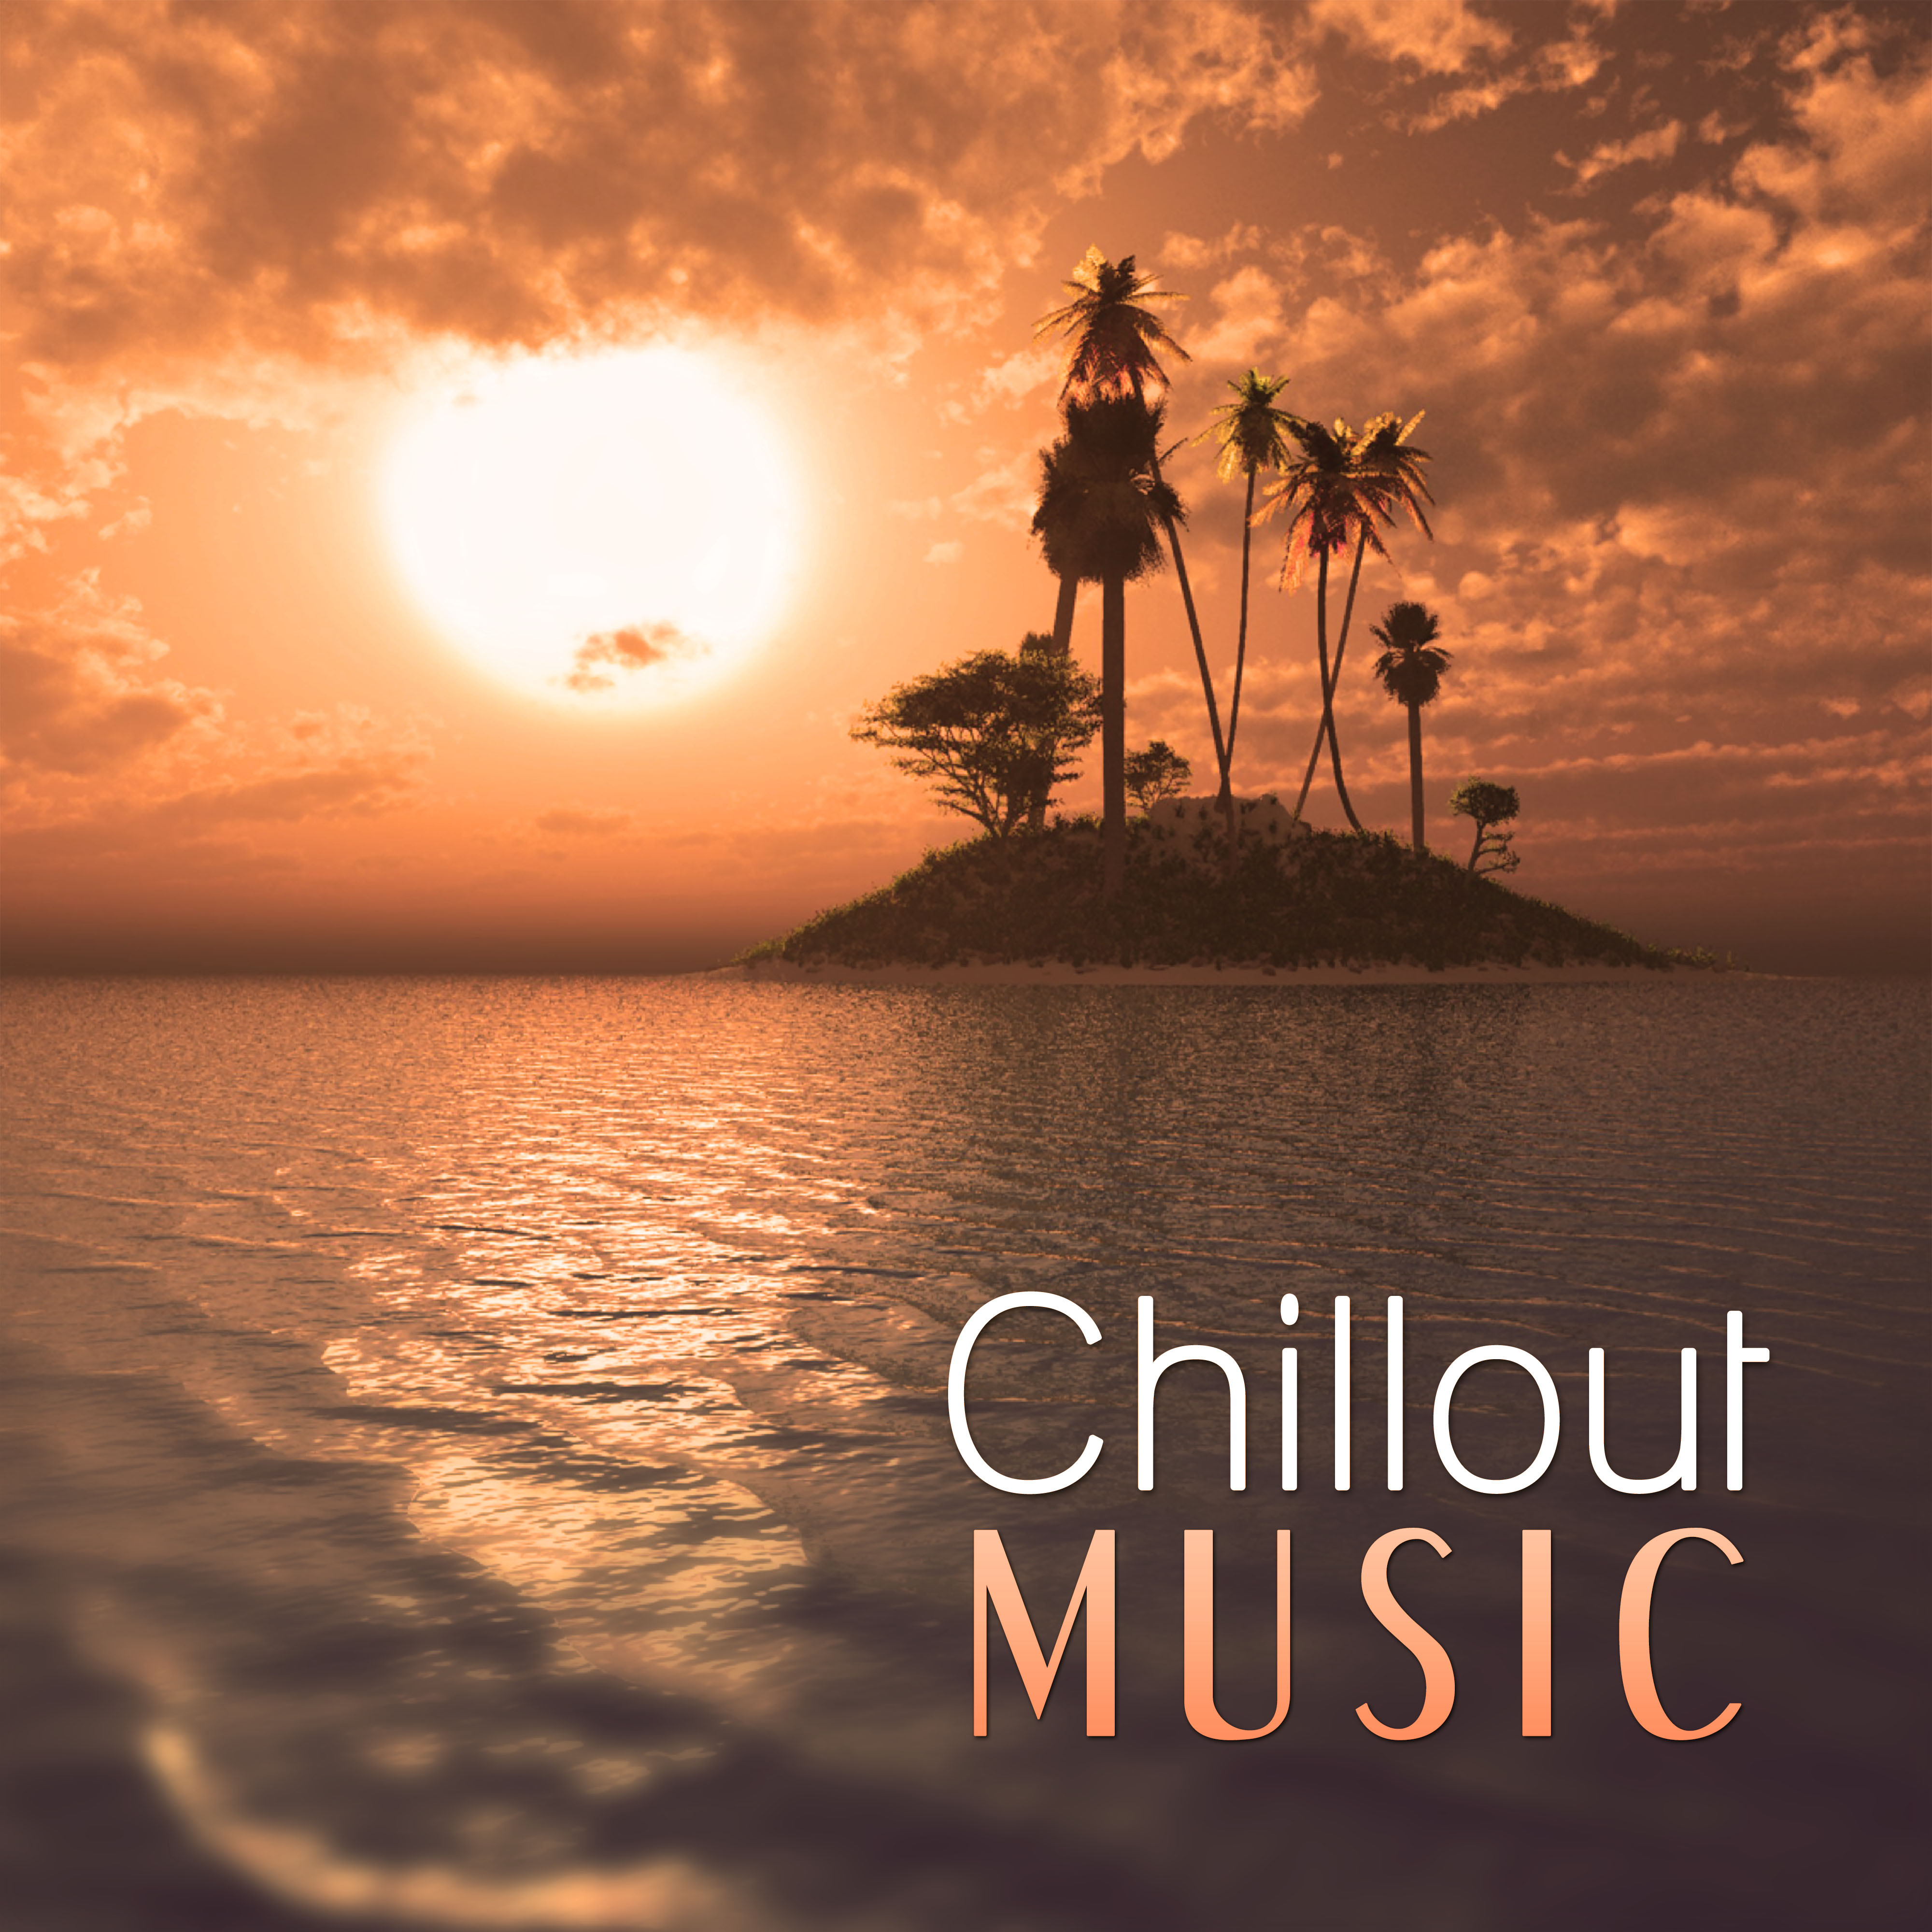 Chillout Music - Ibiza Party, Lounge Summer, Chill Out Music, Summer Time, Deep Dive